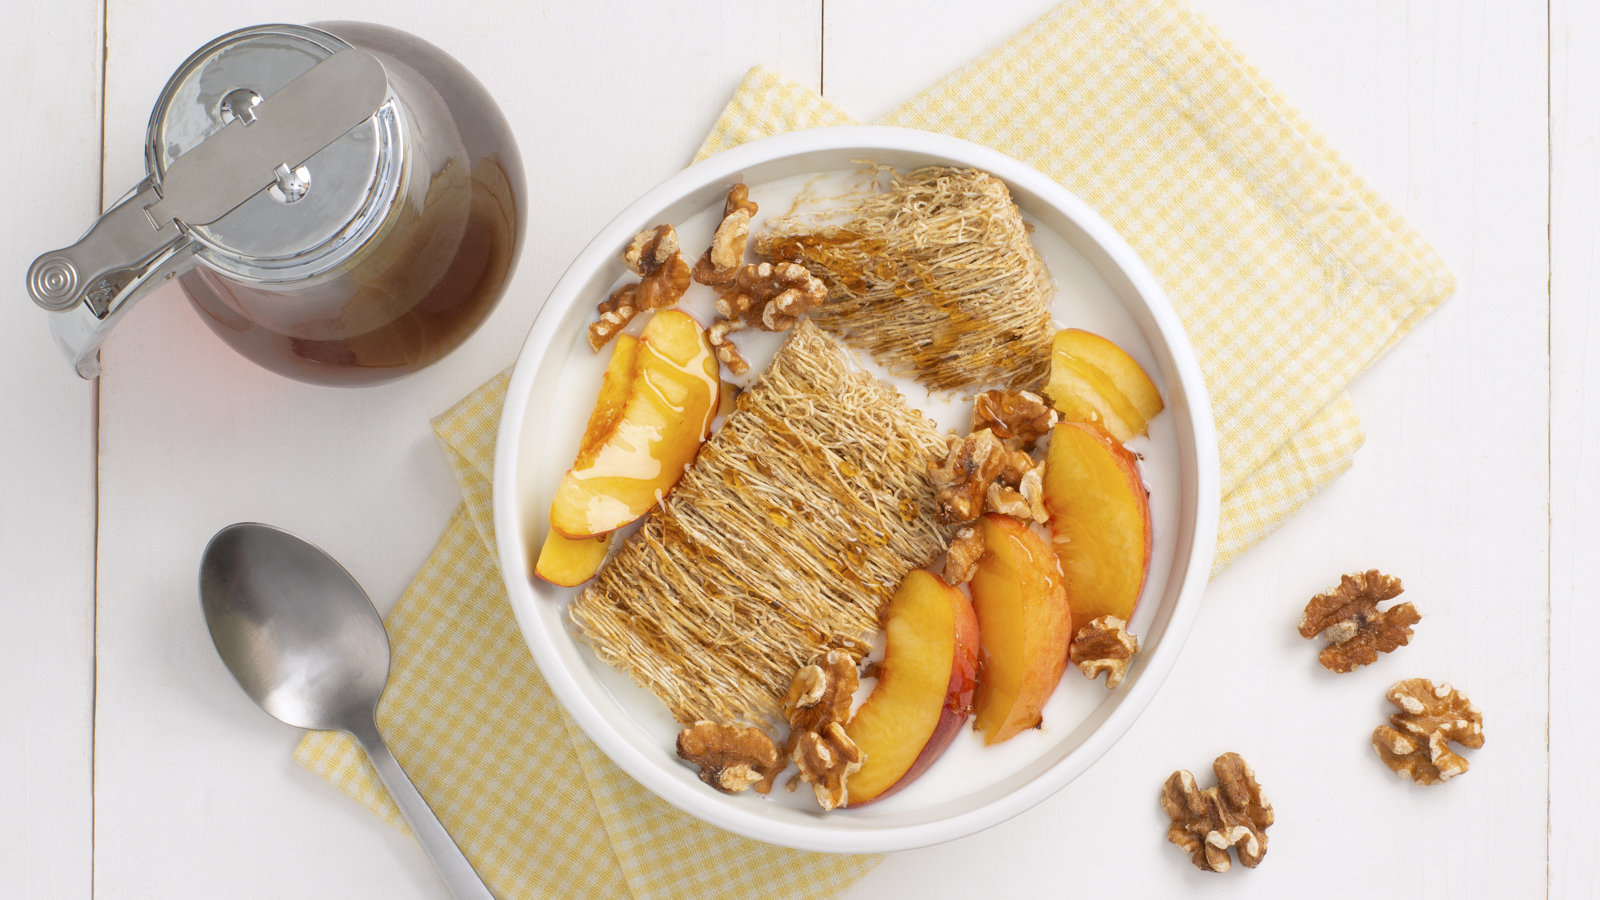 Two shredded wheat biscuits in a white bowl with peaches and honey on top.